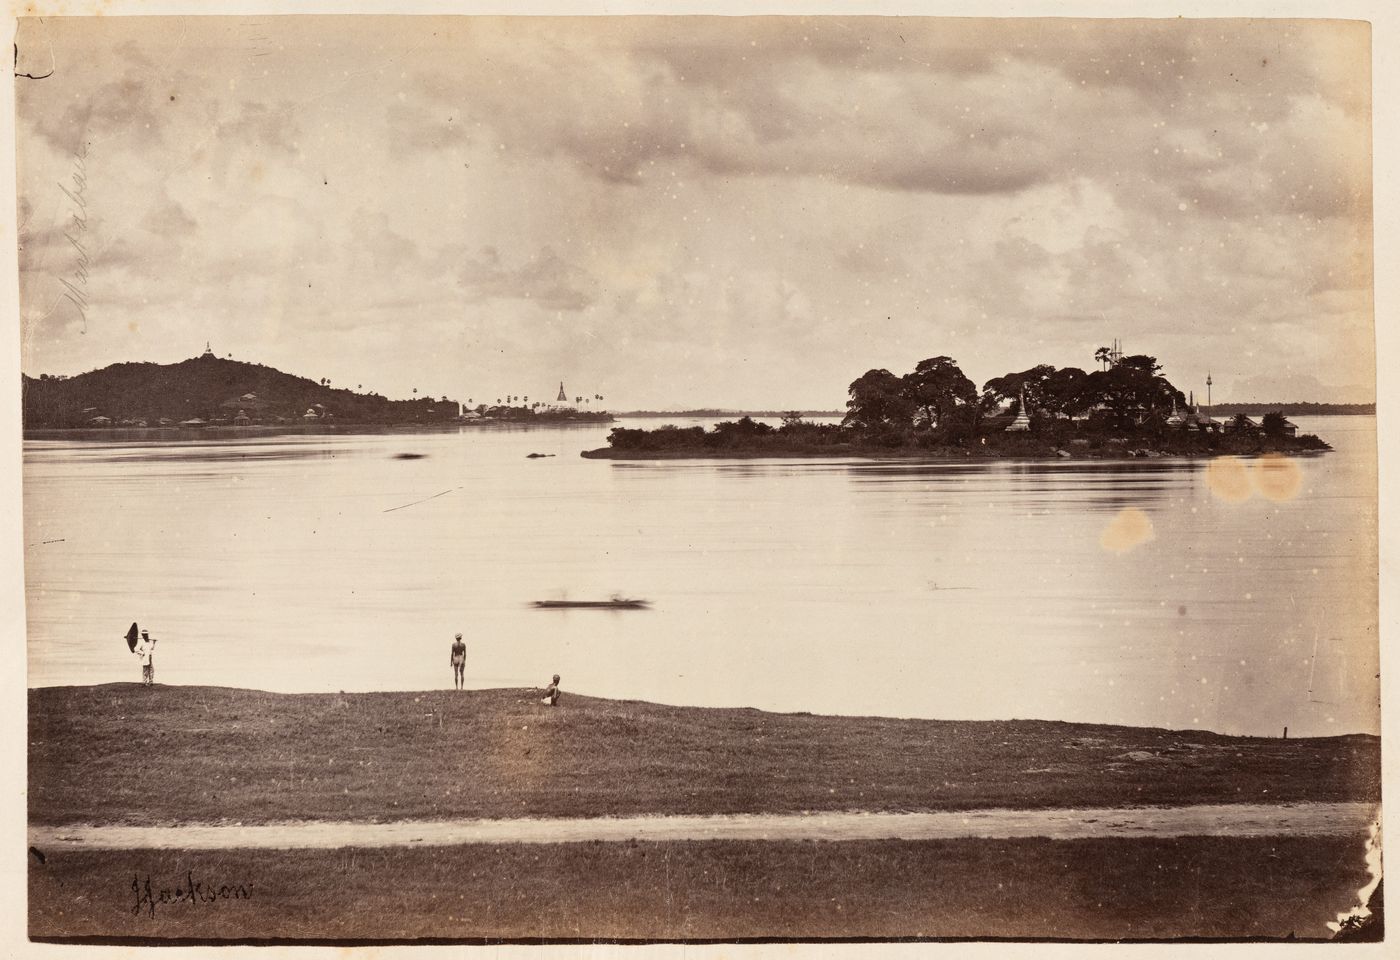 View of a river and an island with stupas showing additional stupas in the background, Martaban, Burma (now Myanmar)